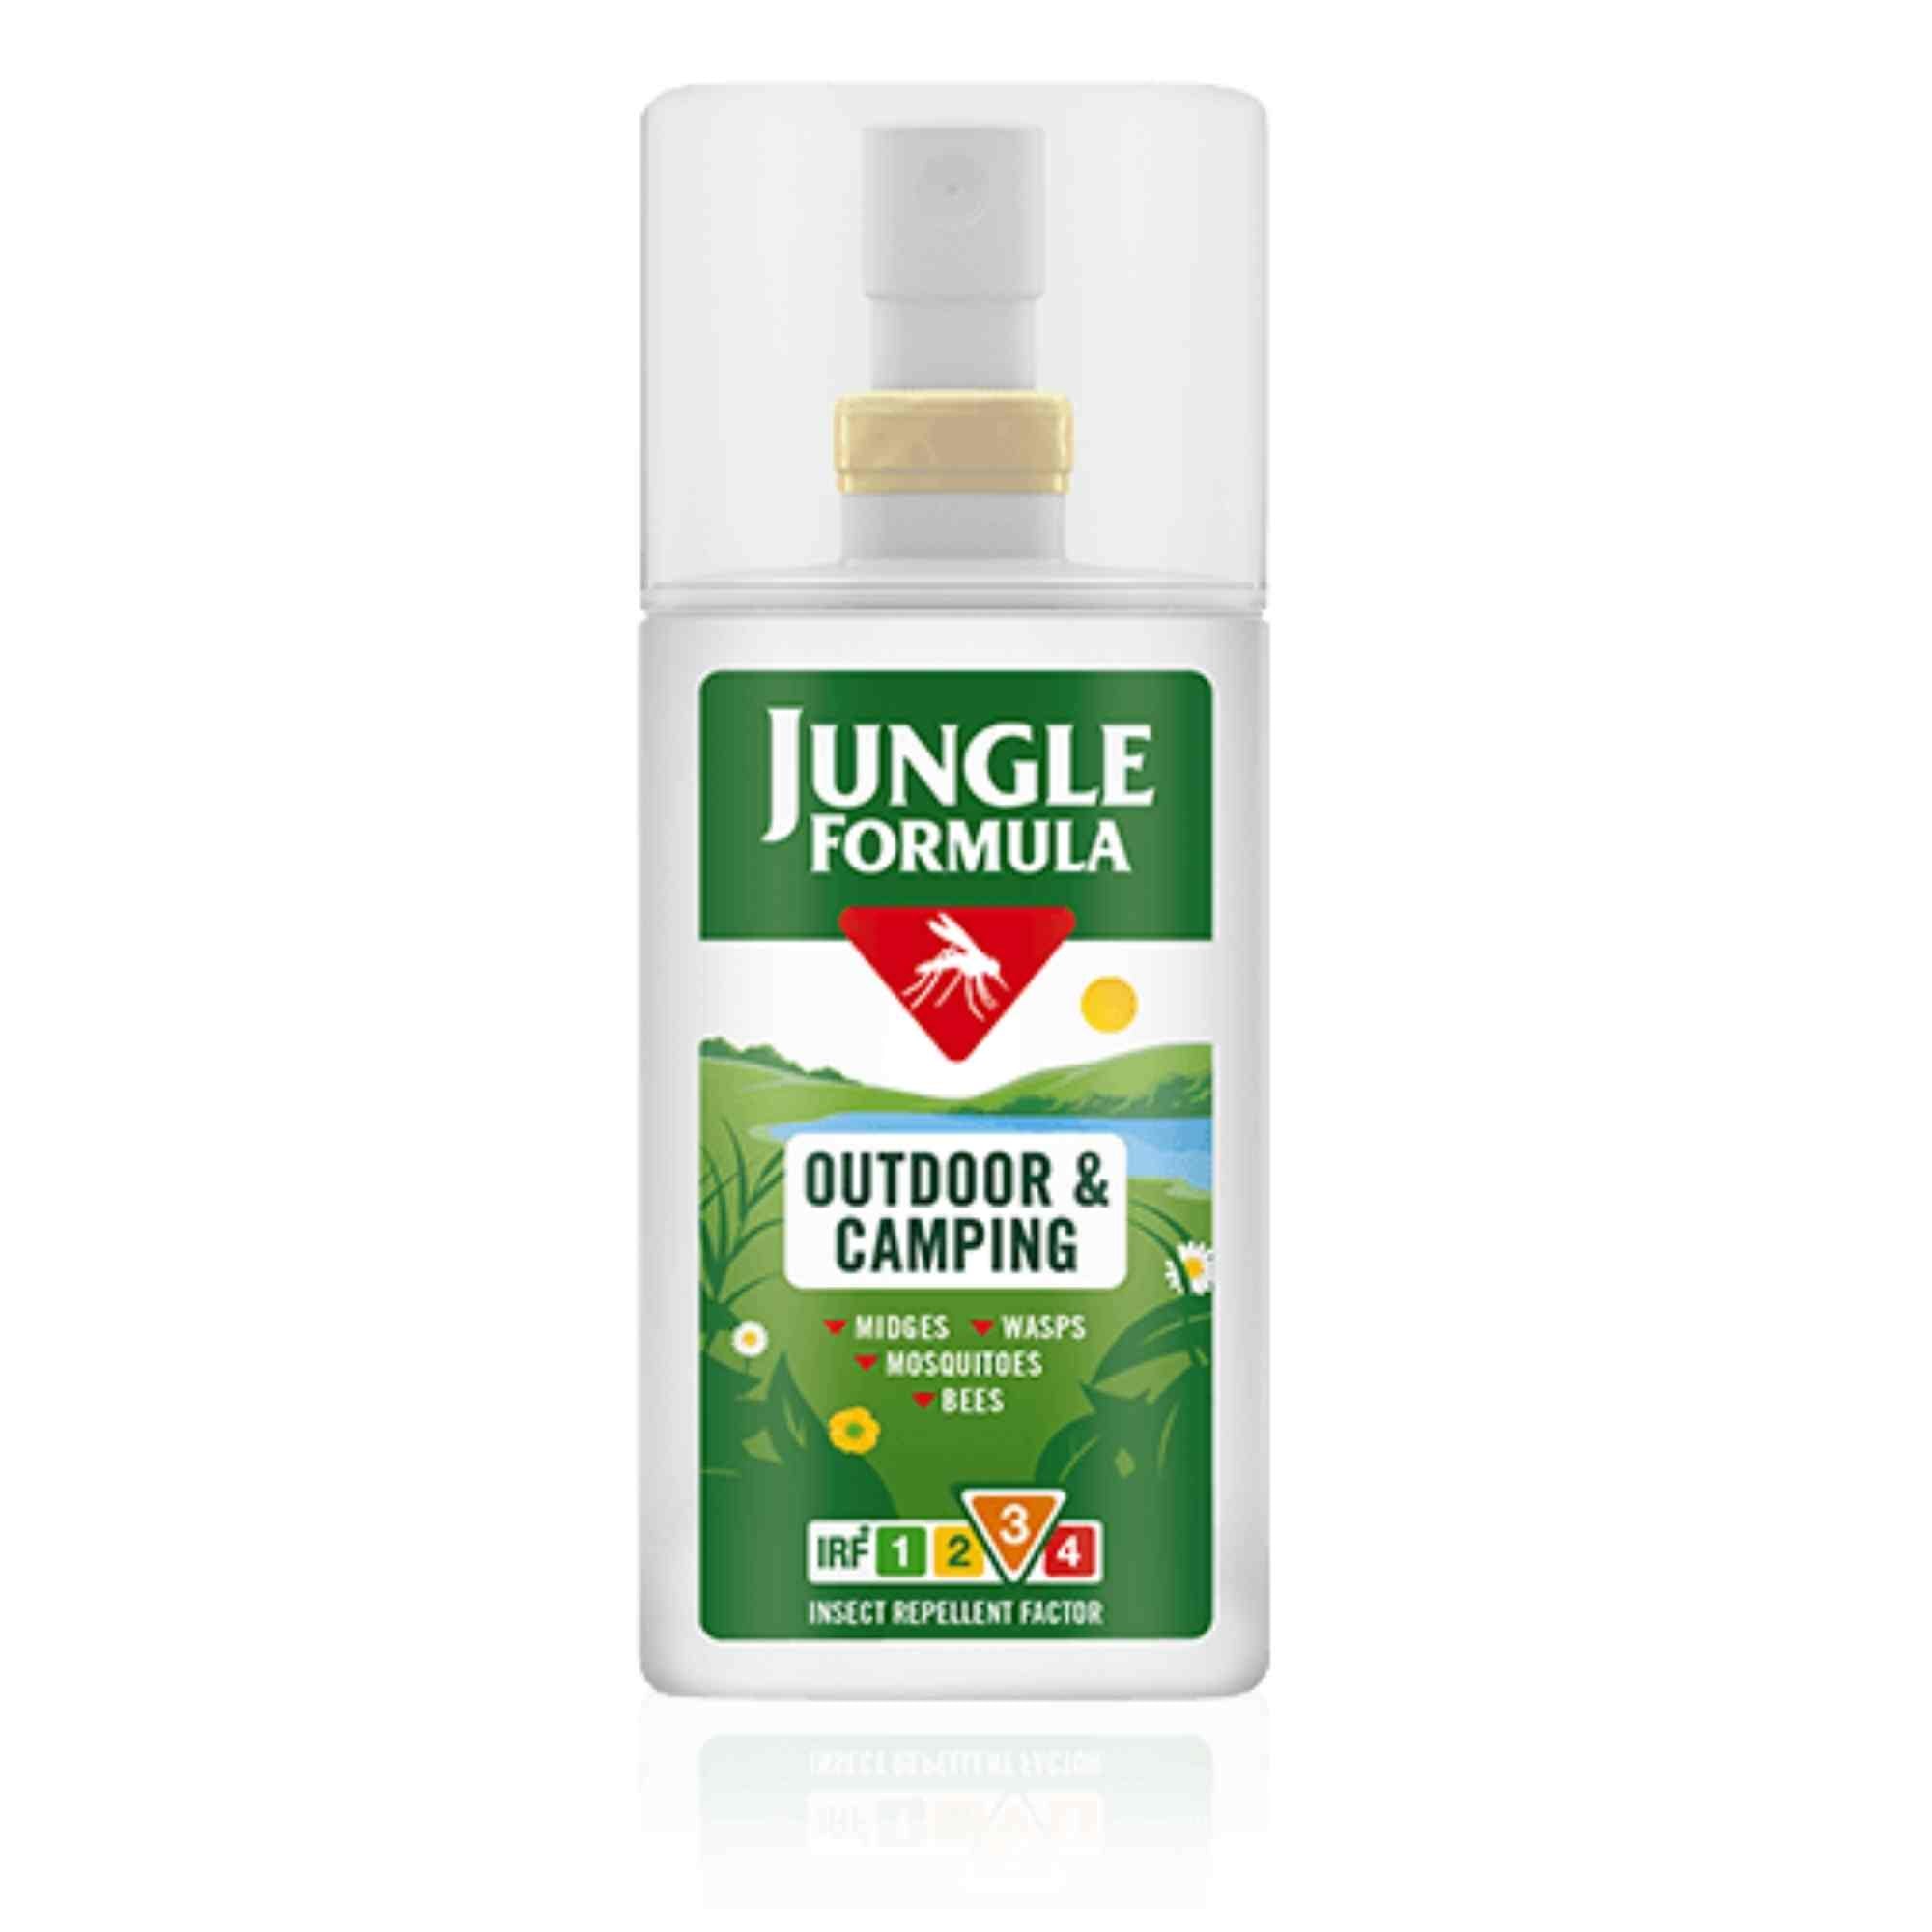 Jungle Formula Outdoor & Camping Insect Repellent Spray